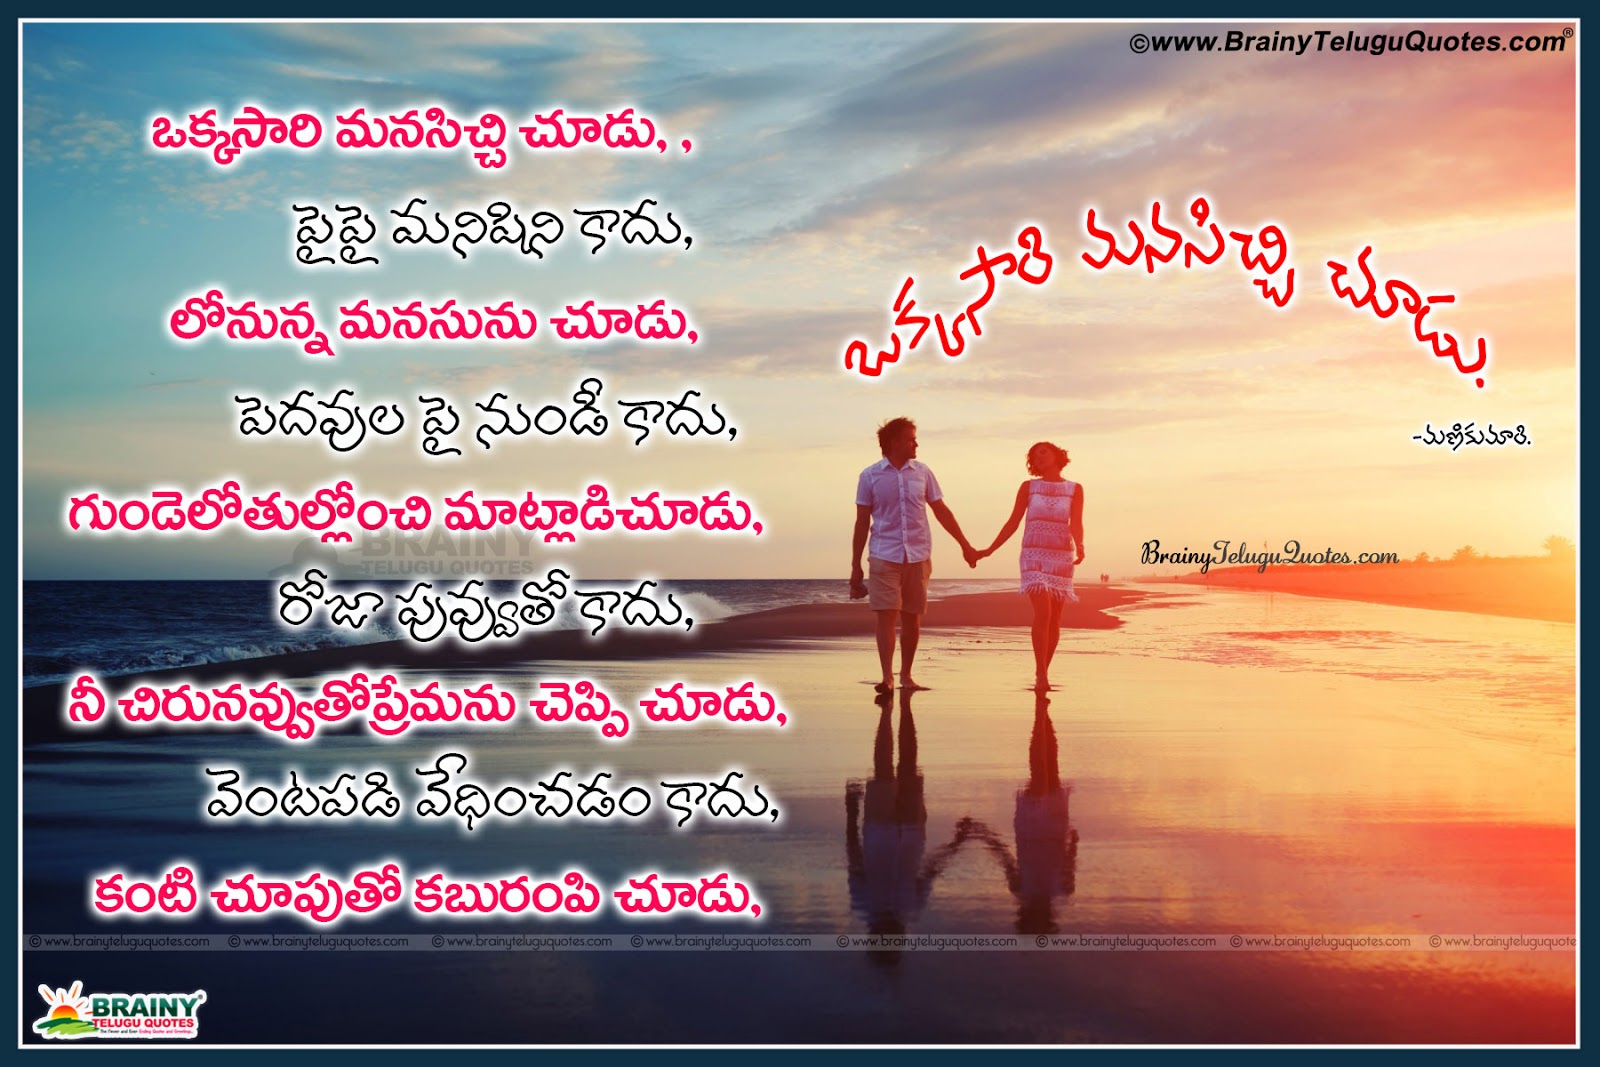 Inspiring True Love Words and Love Sayings in Telugu with couple